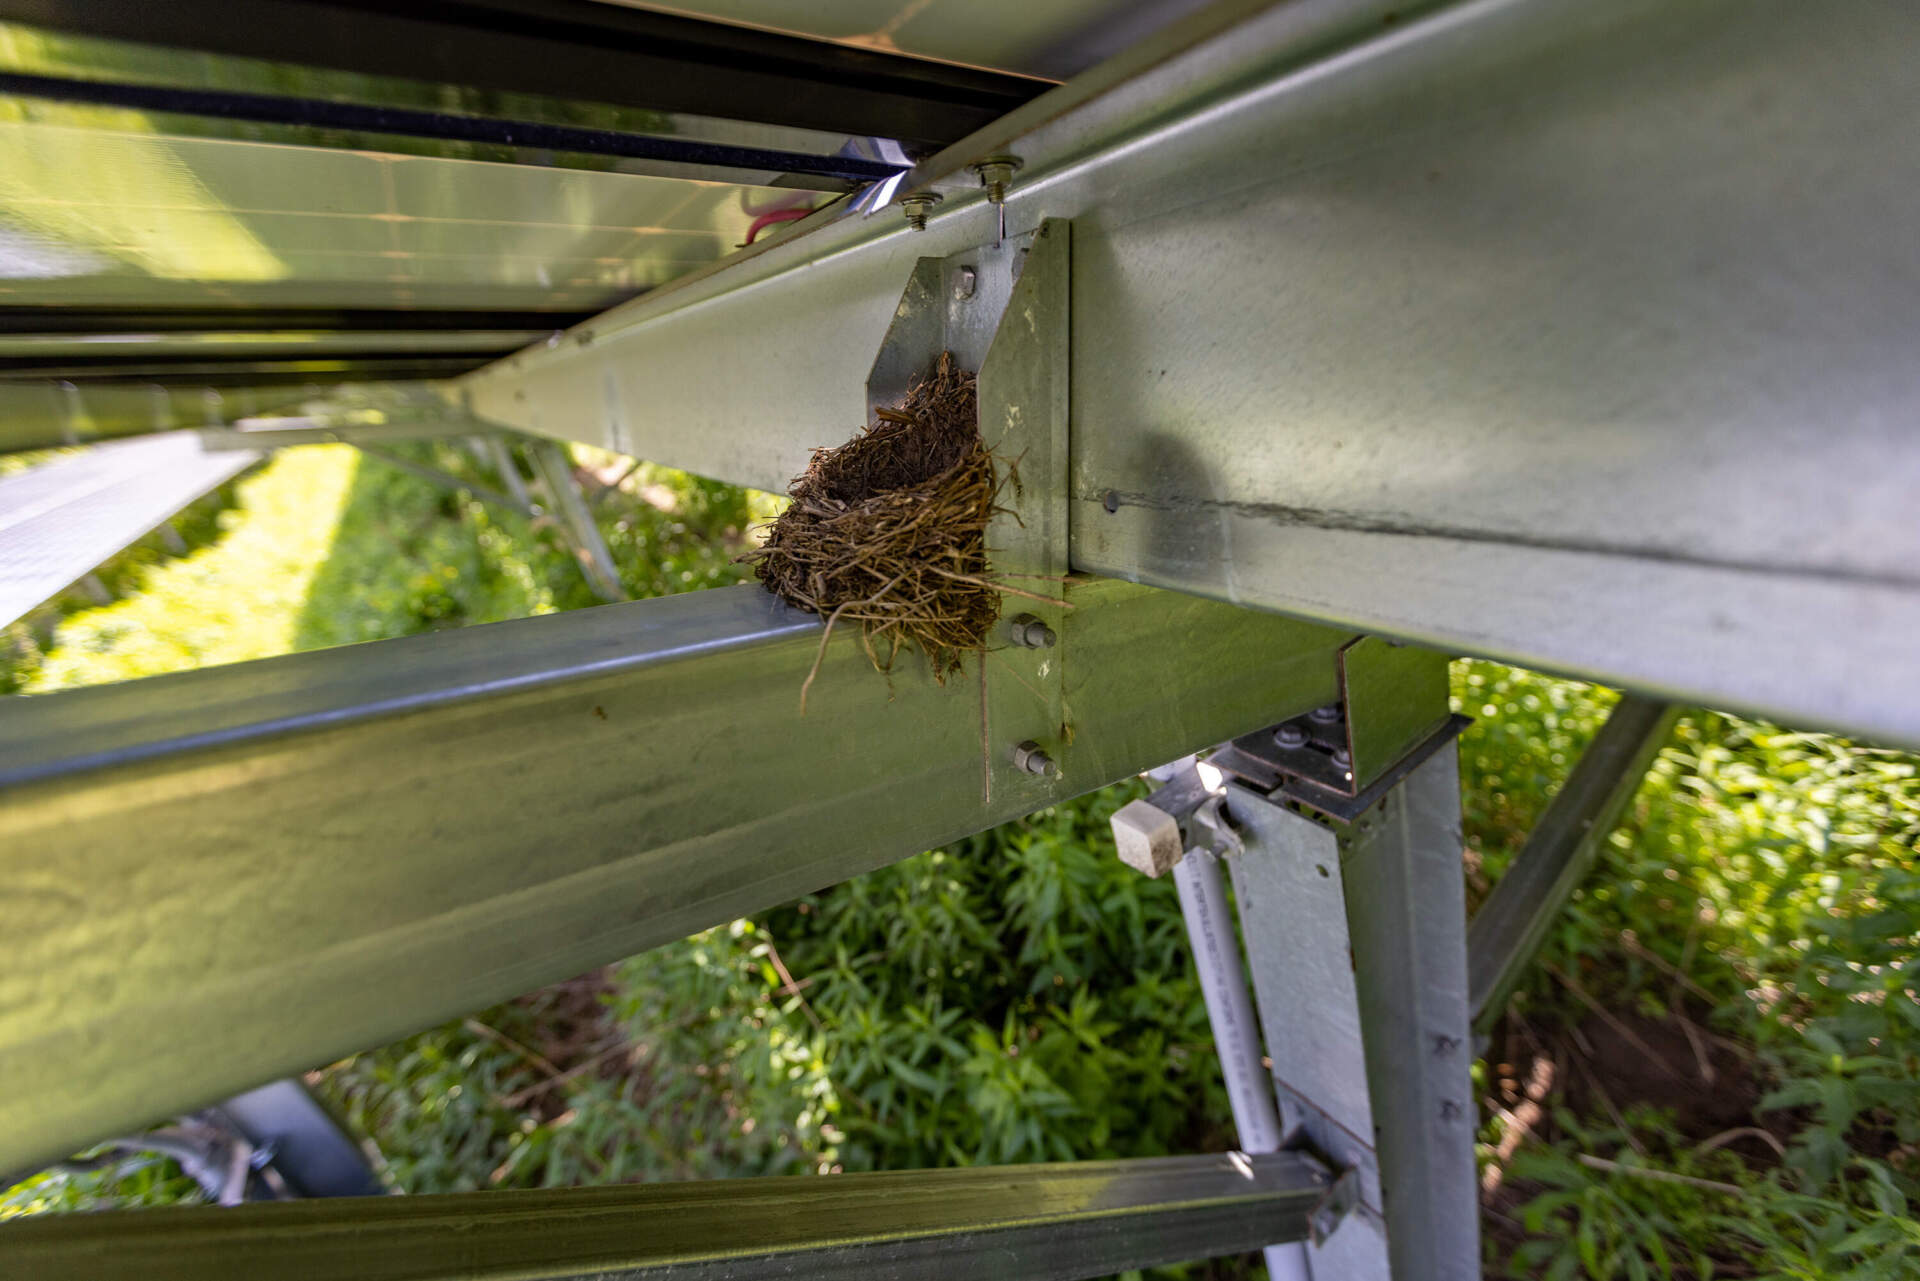 A finch nest beneath one of the solar arrays in the pollinator garden at the Weld Research Building of the Arnold Arboretum. (Jesse Costa/WBUR)